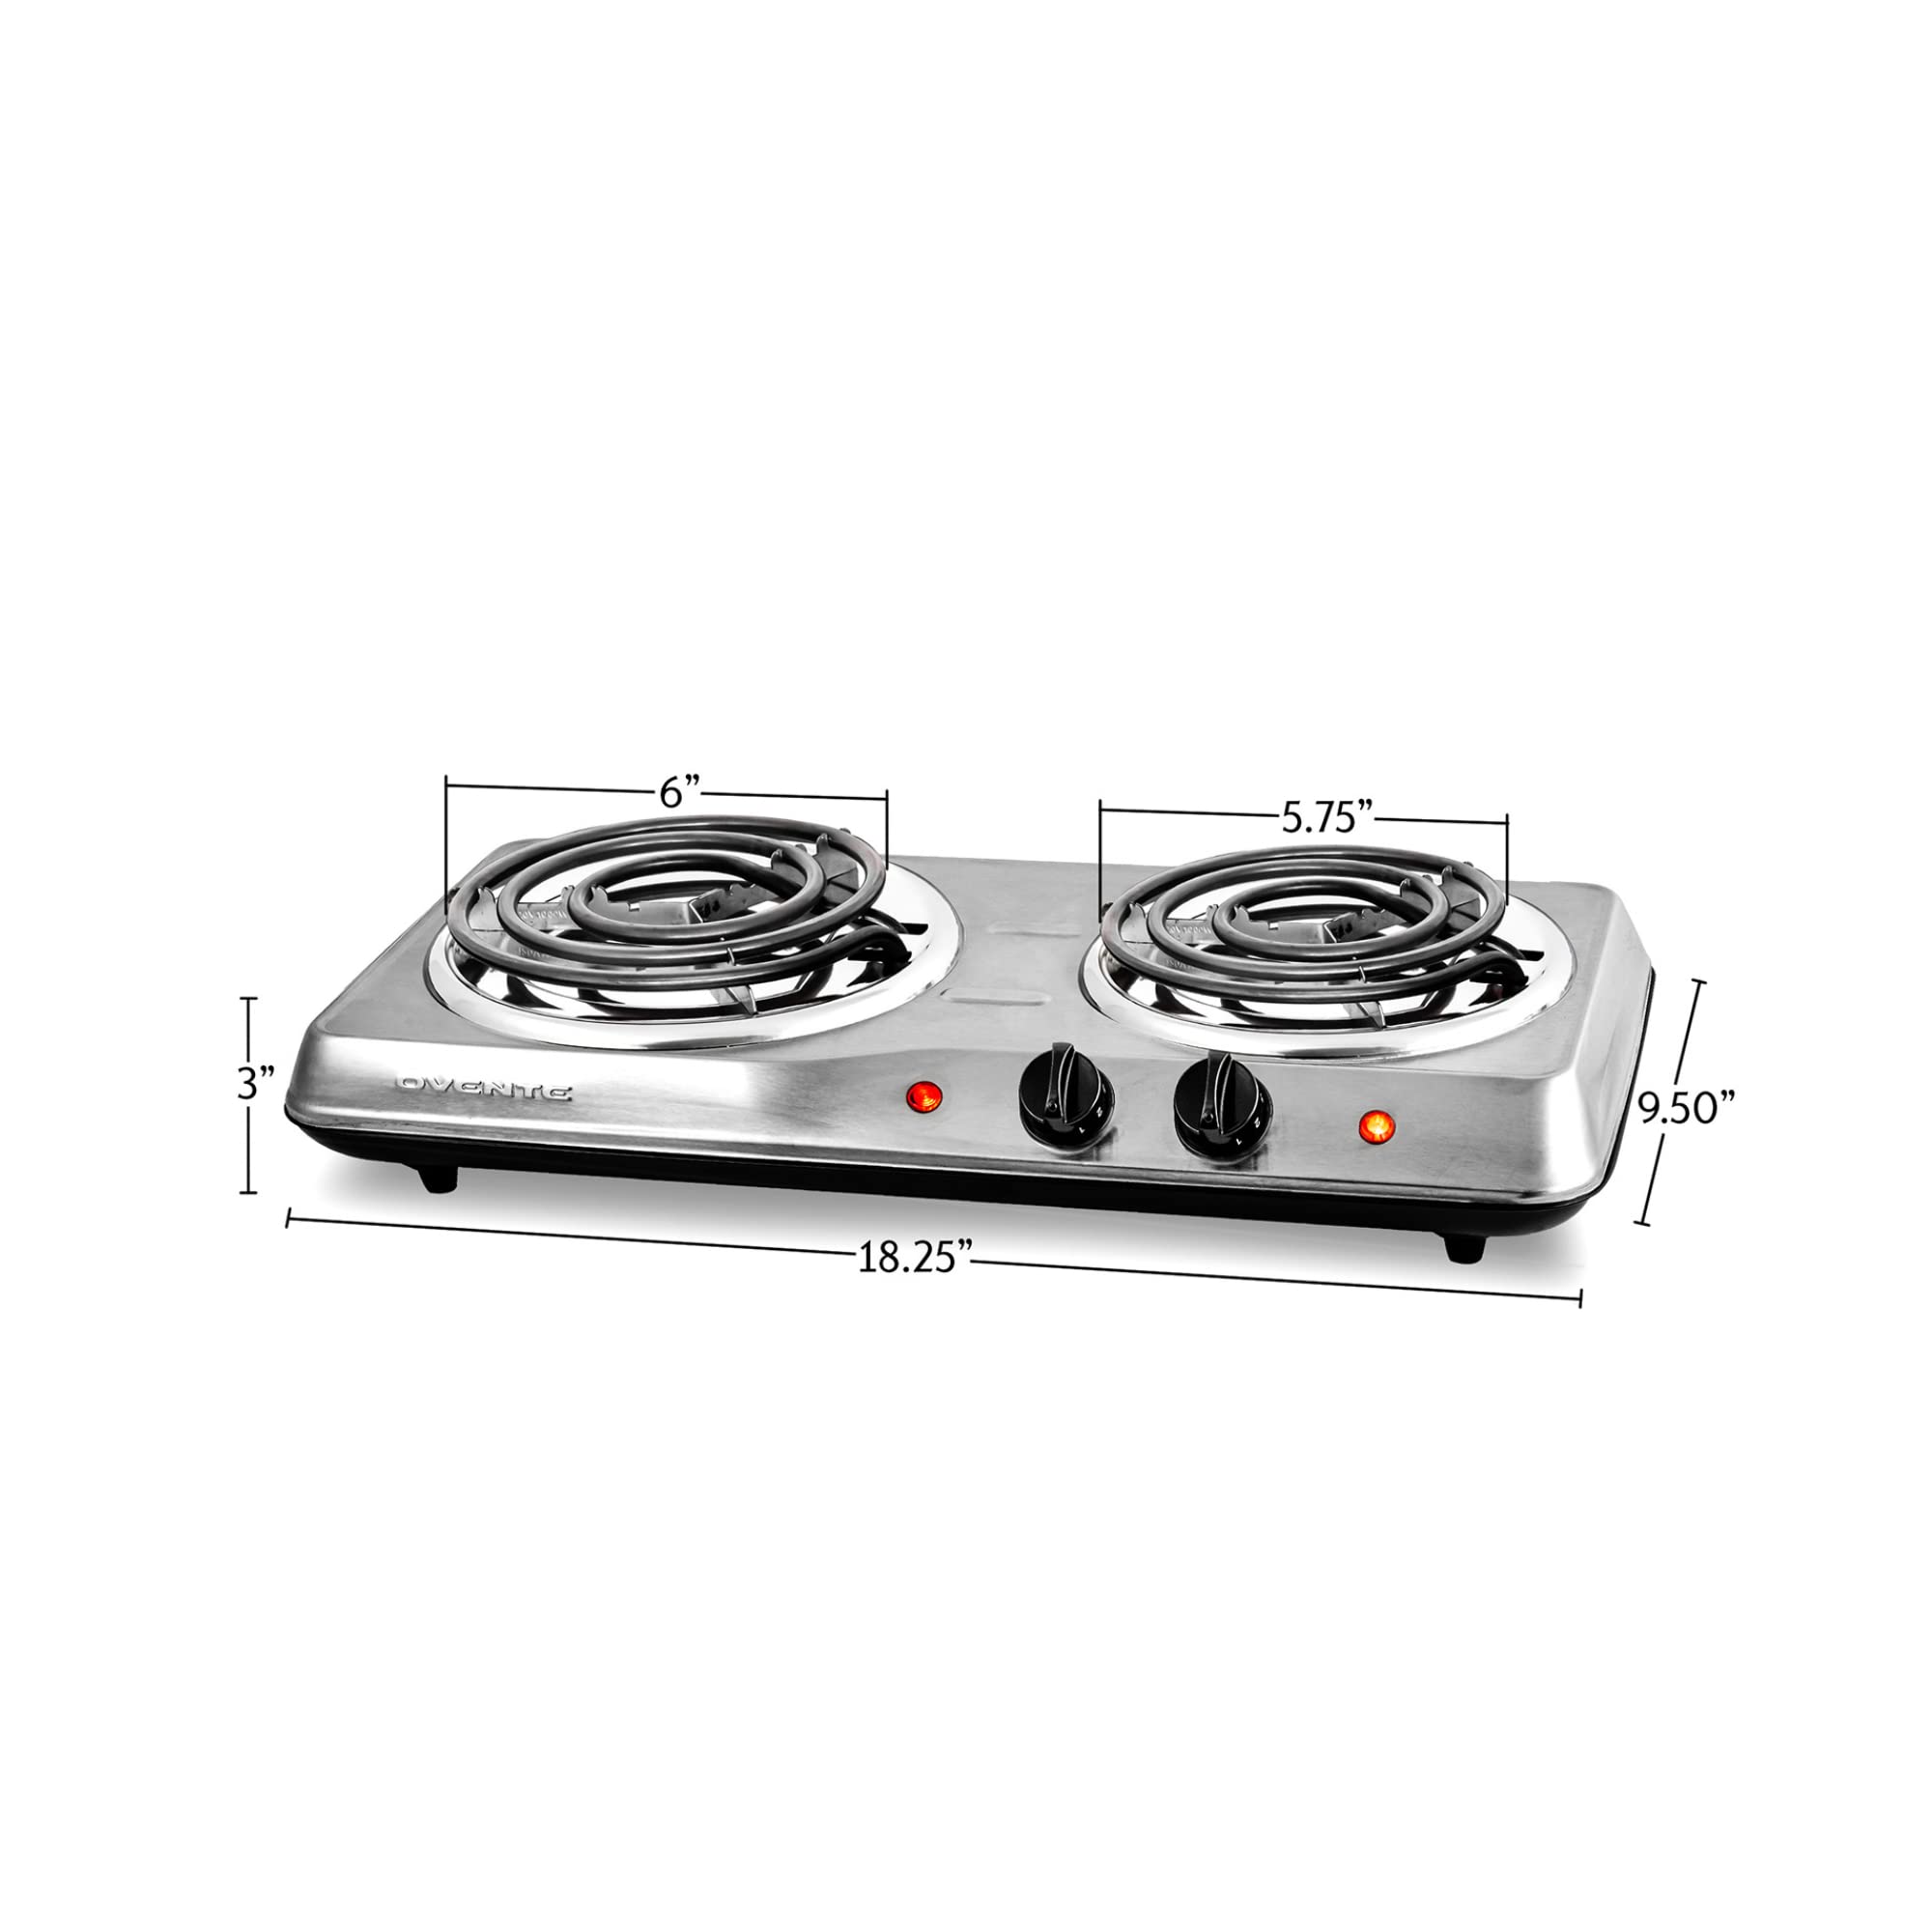 Ovente Electric Double Coil Burner 6 & 5.75 Inch Hot Plate Cooktop with Temperature Control and Easy to Clean Stainless Steel Base, 1700W Portable Countertop Stove for Home or Dorm, Silver BGC102S